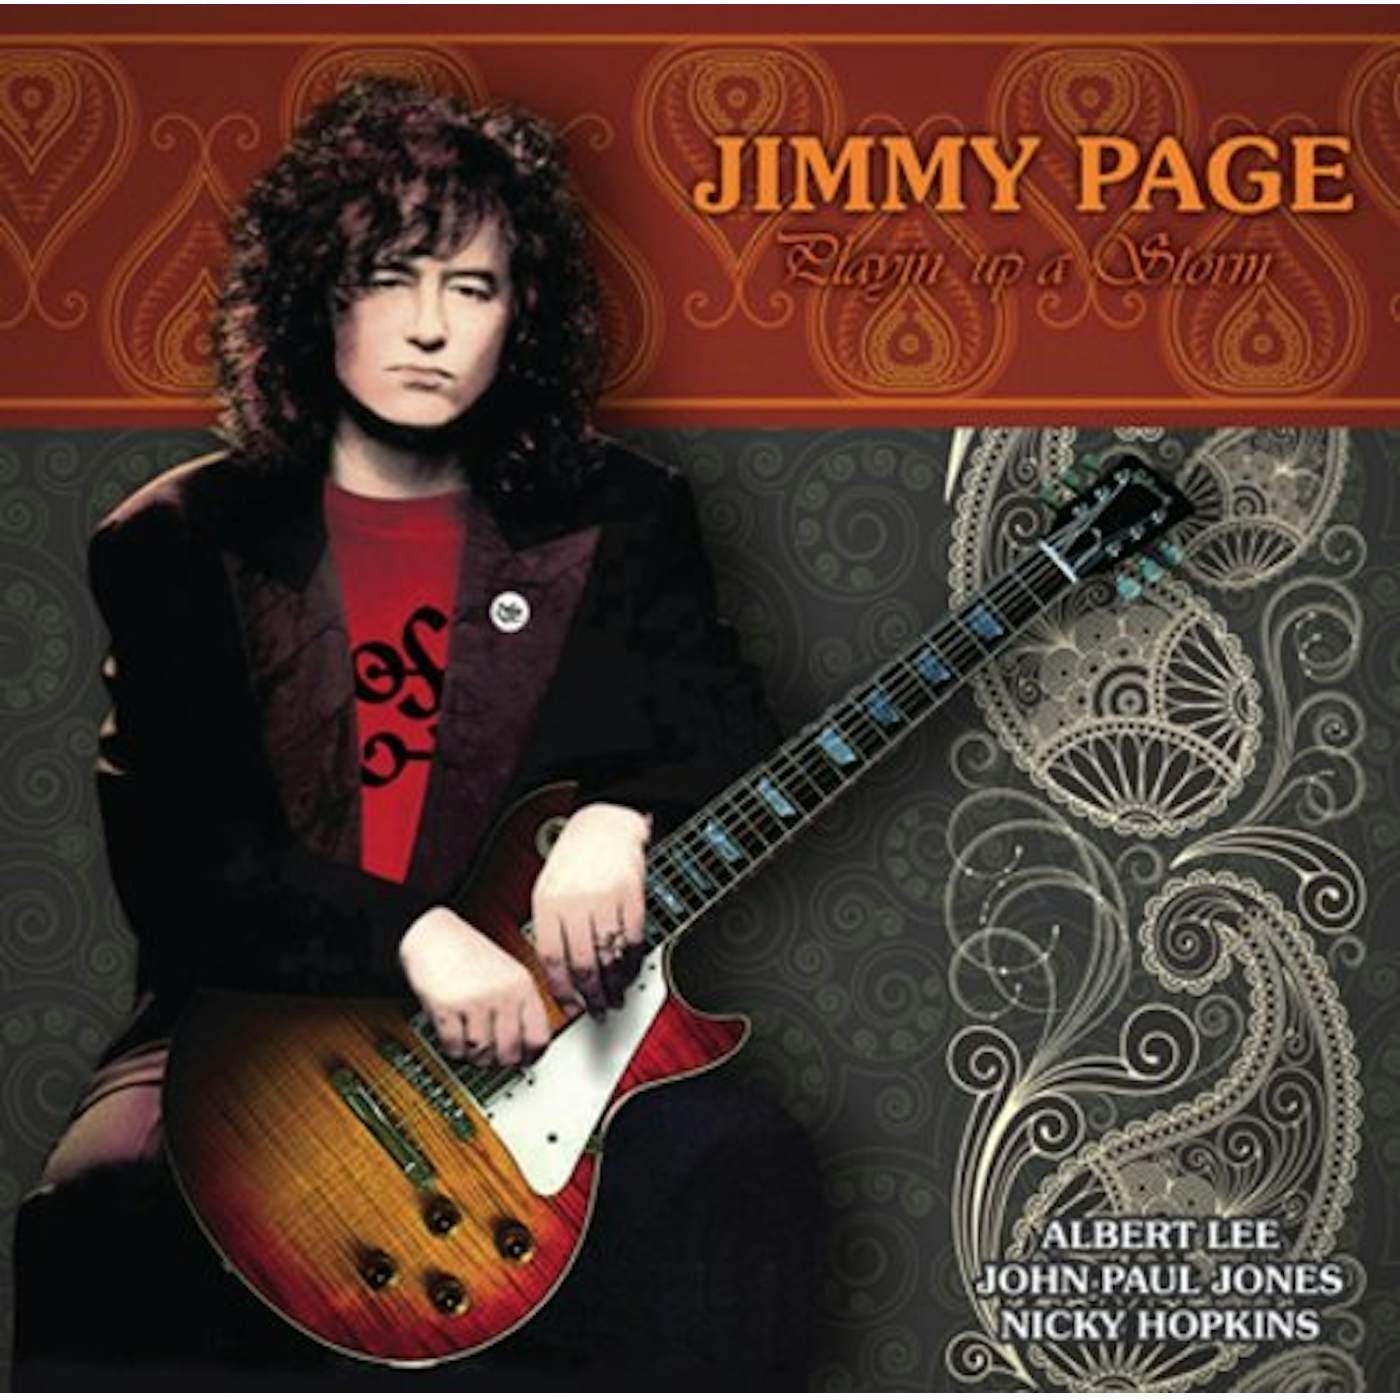 Jimmy Page PLAYIN UP A STORM Vinyl Record